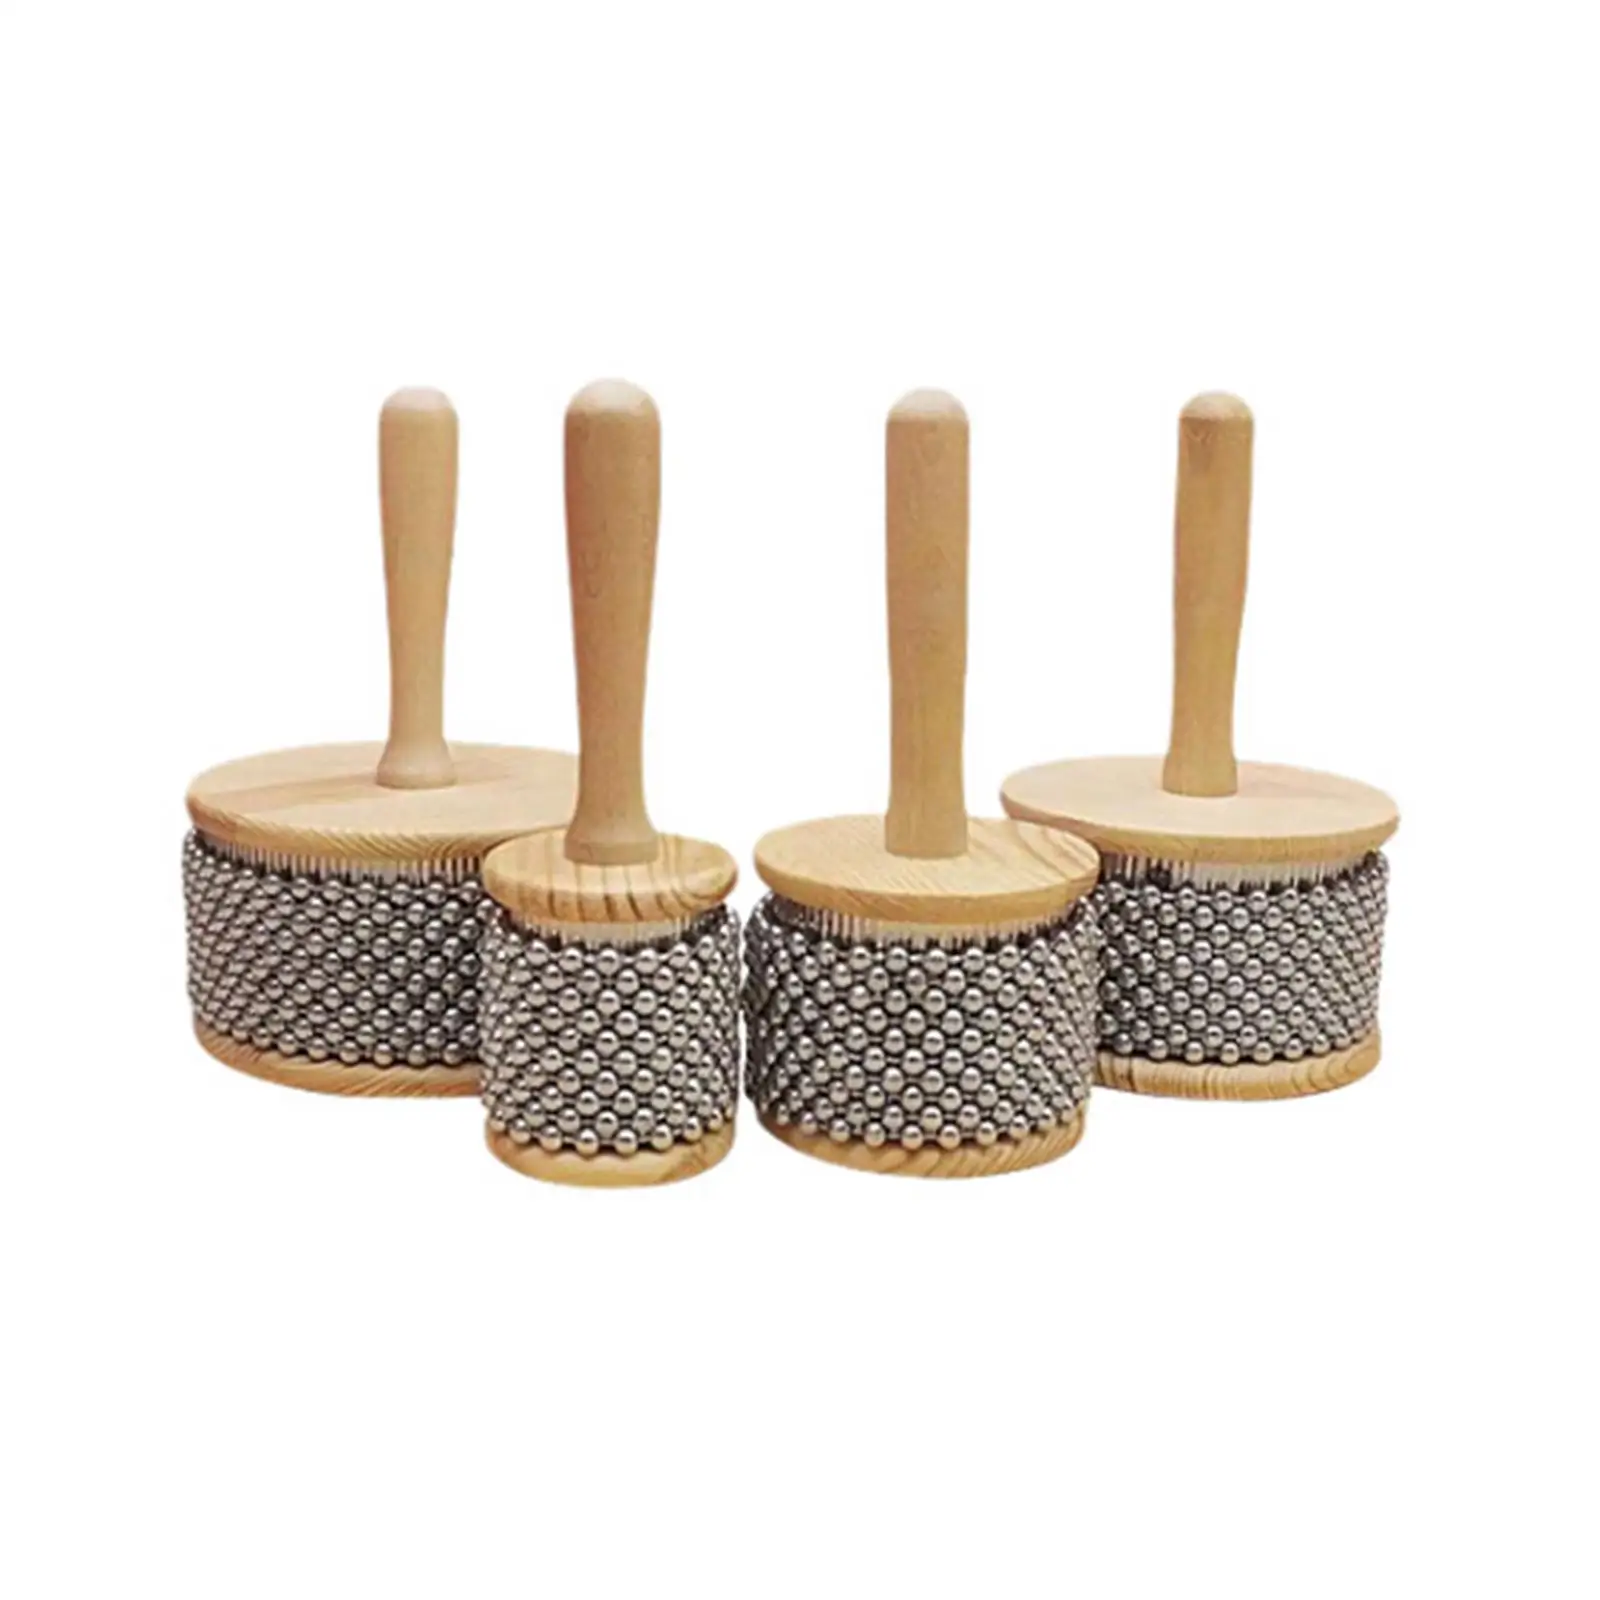 Wooden Hand Cabasa Percussion Instrument Cabasa Music Instrument Musical Toy for Classroom Playing at Home Music Education Band